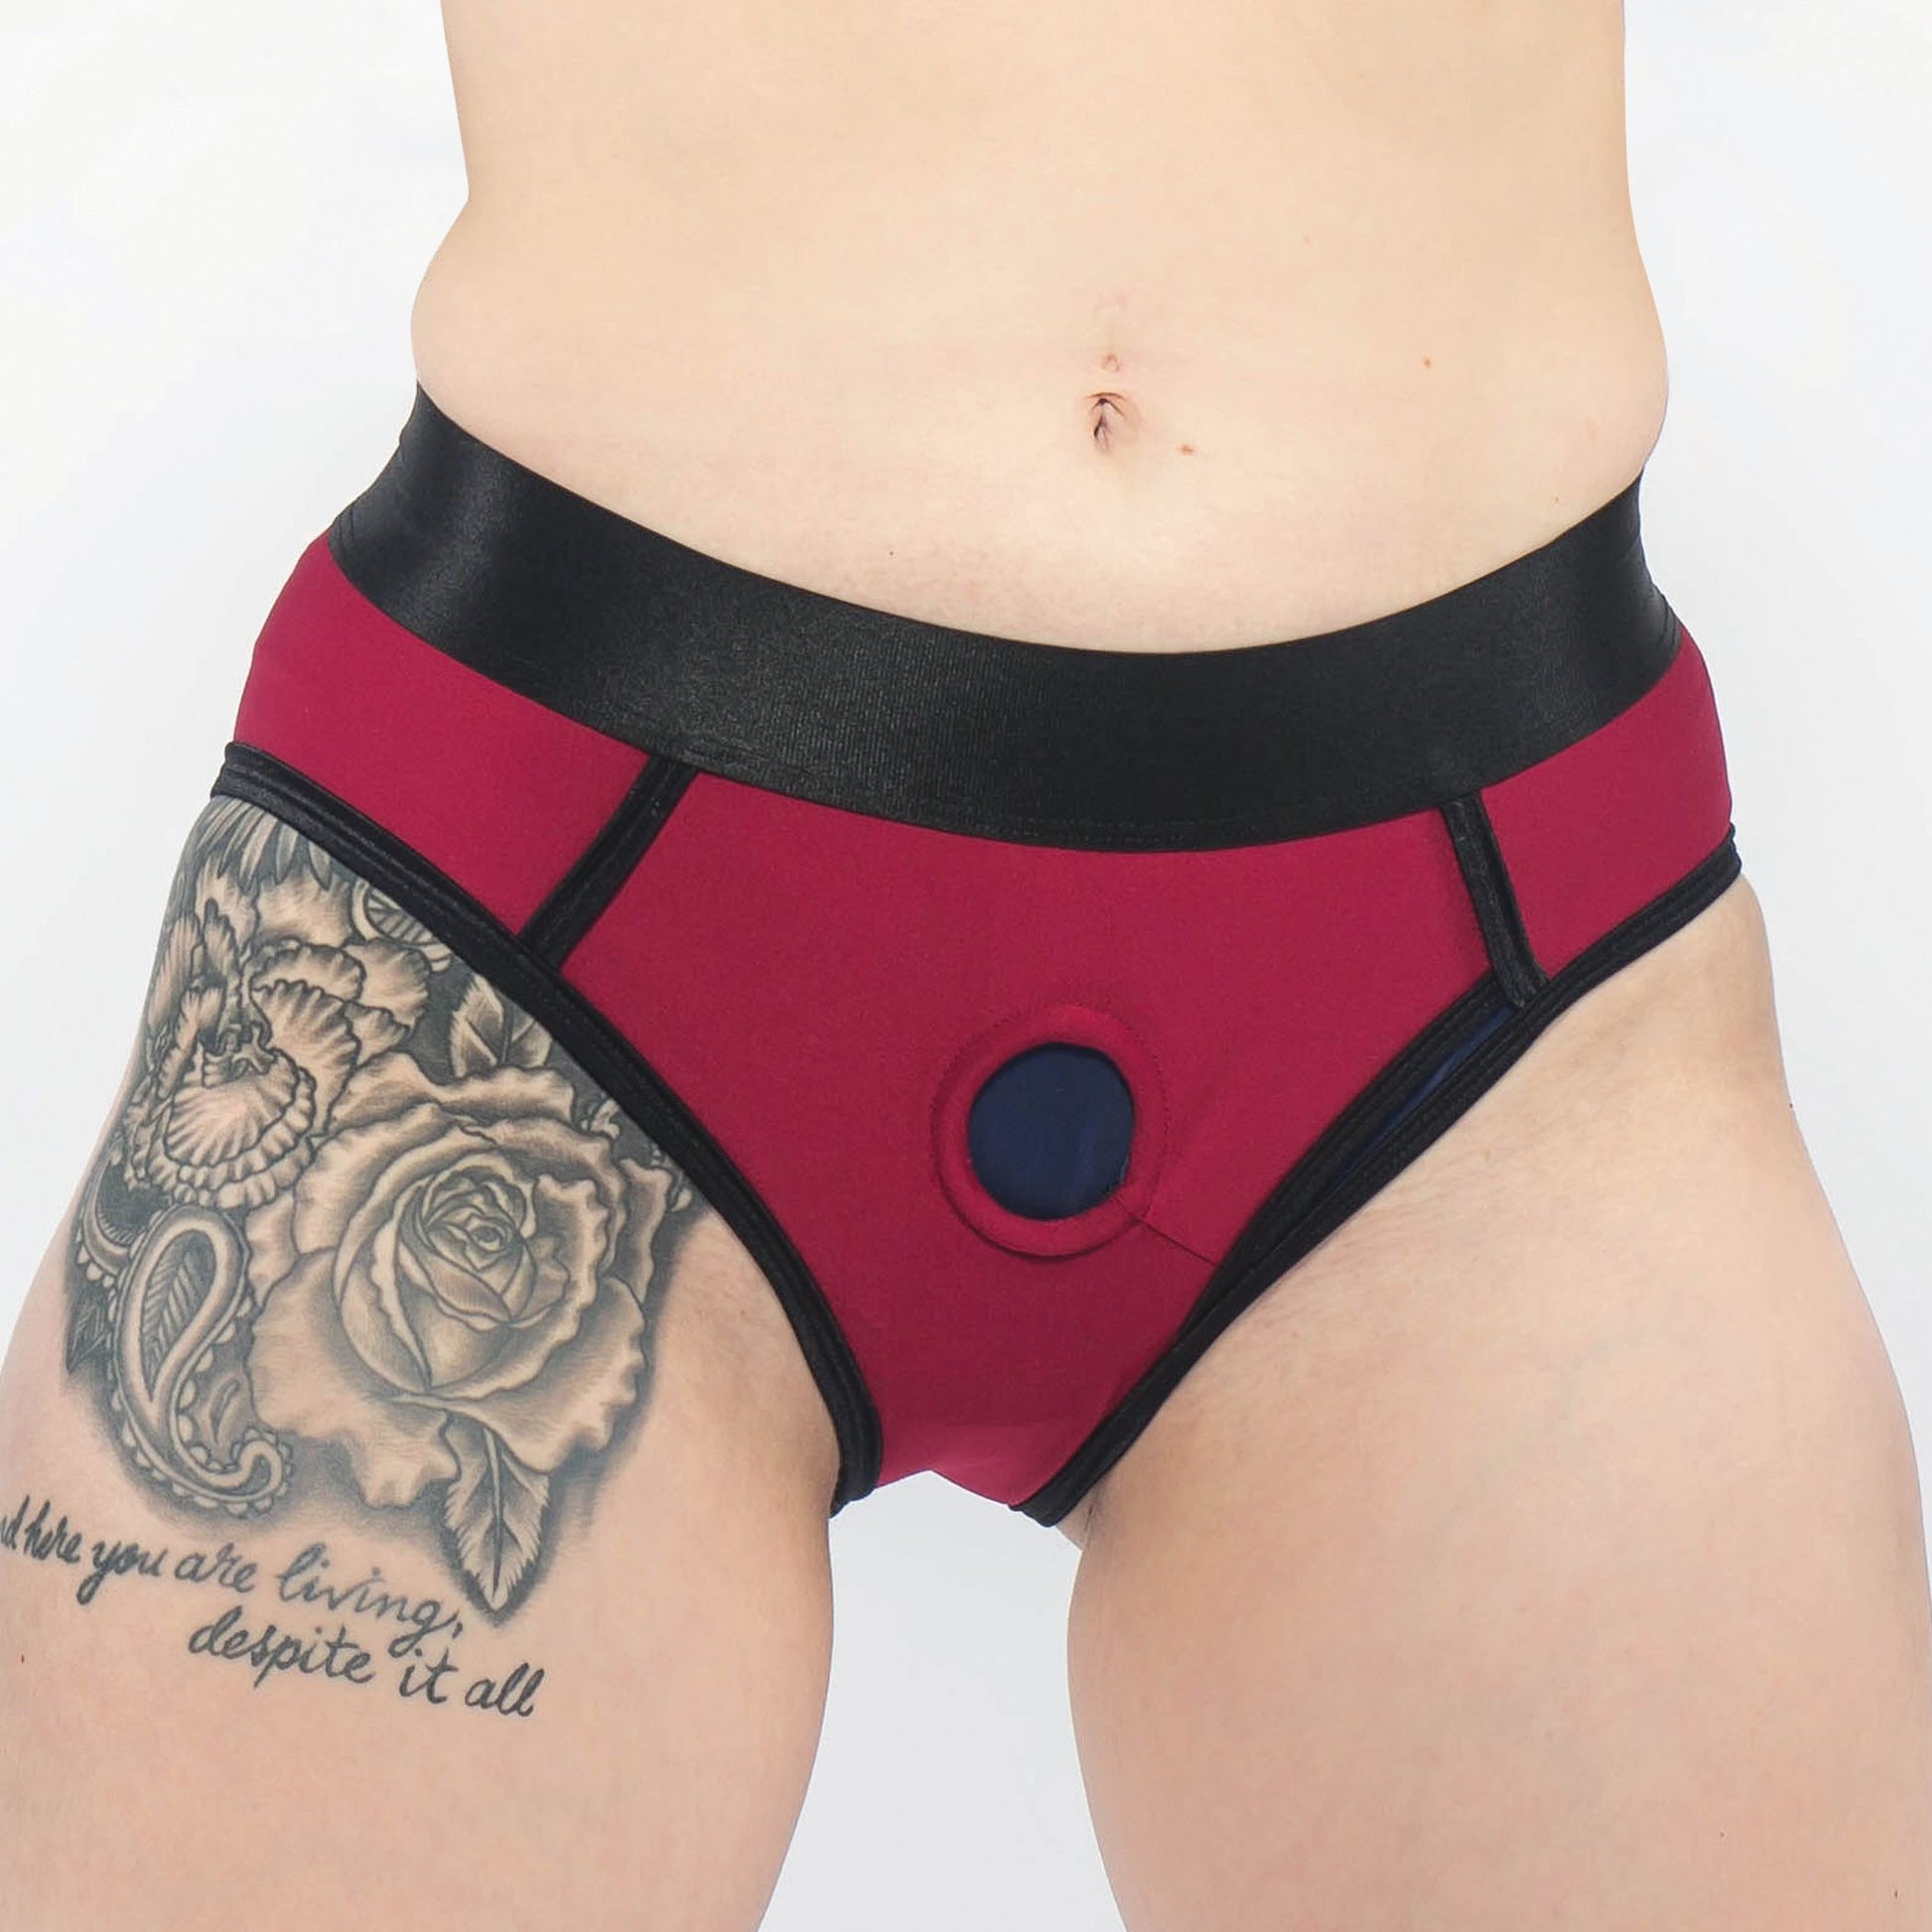 Close-up of a person wearing the harness briefs, front view (red).